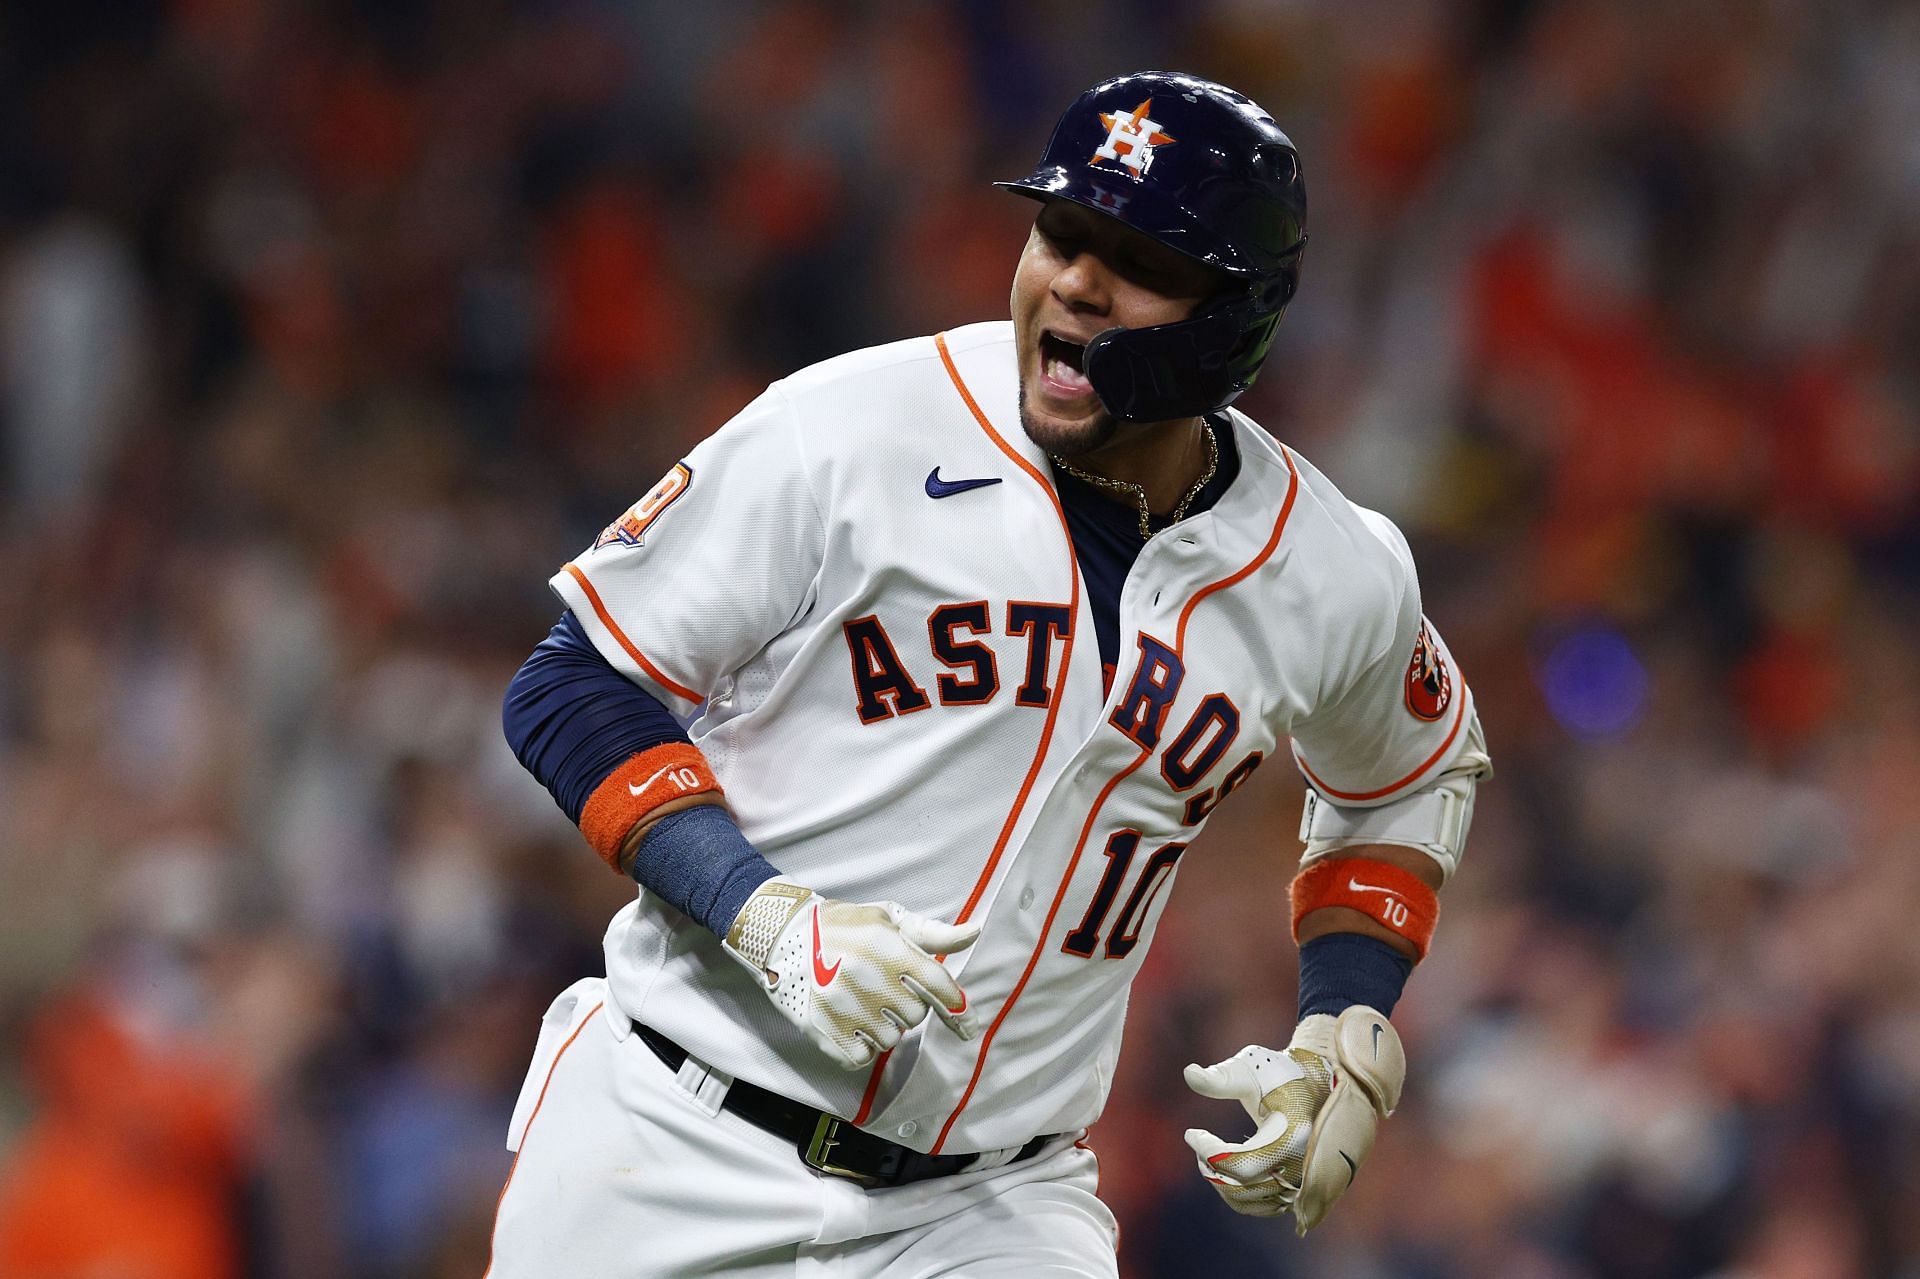 Astros insider: How Yuli Gurriel's swing was sparked by his older